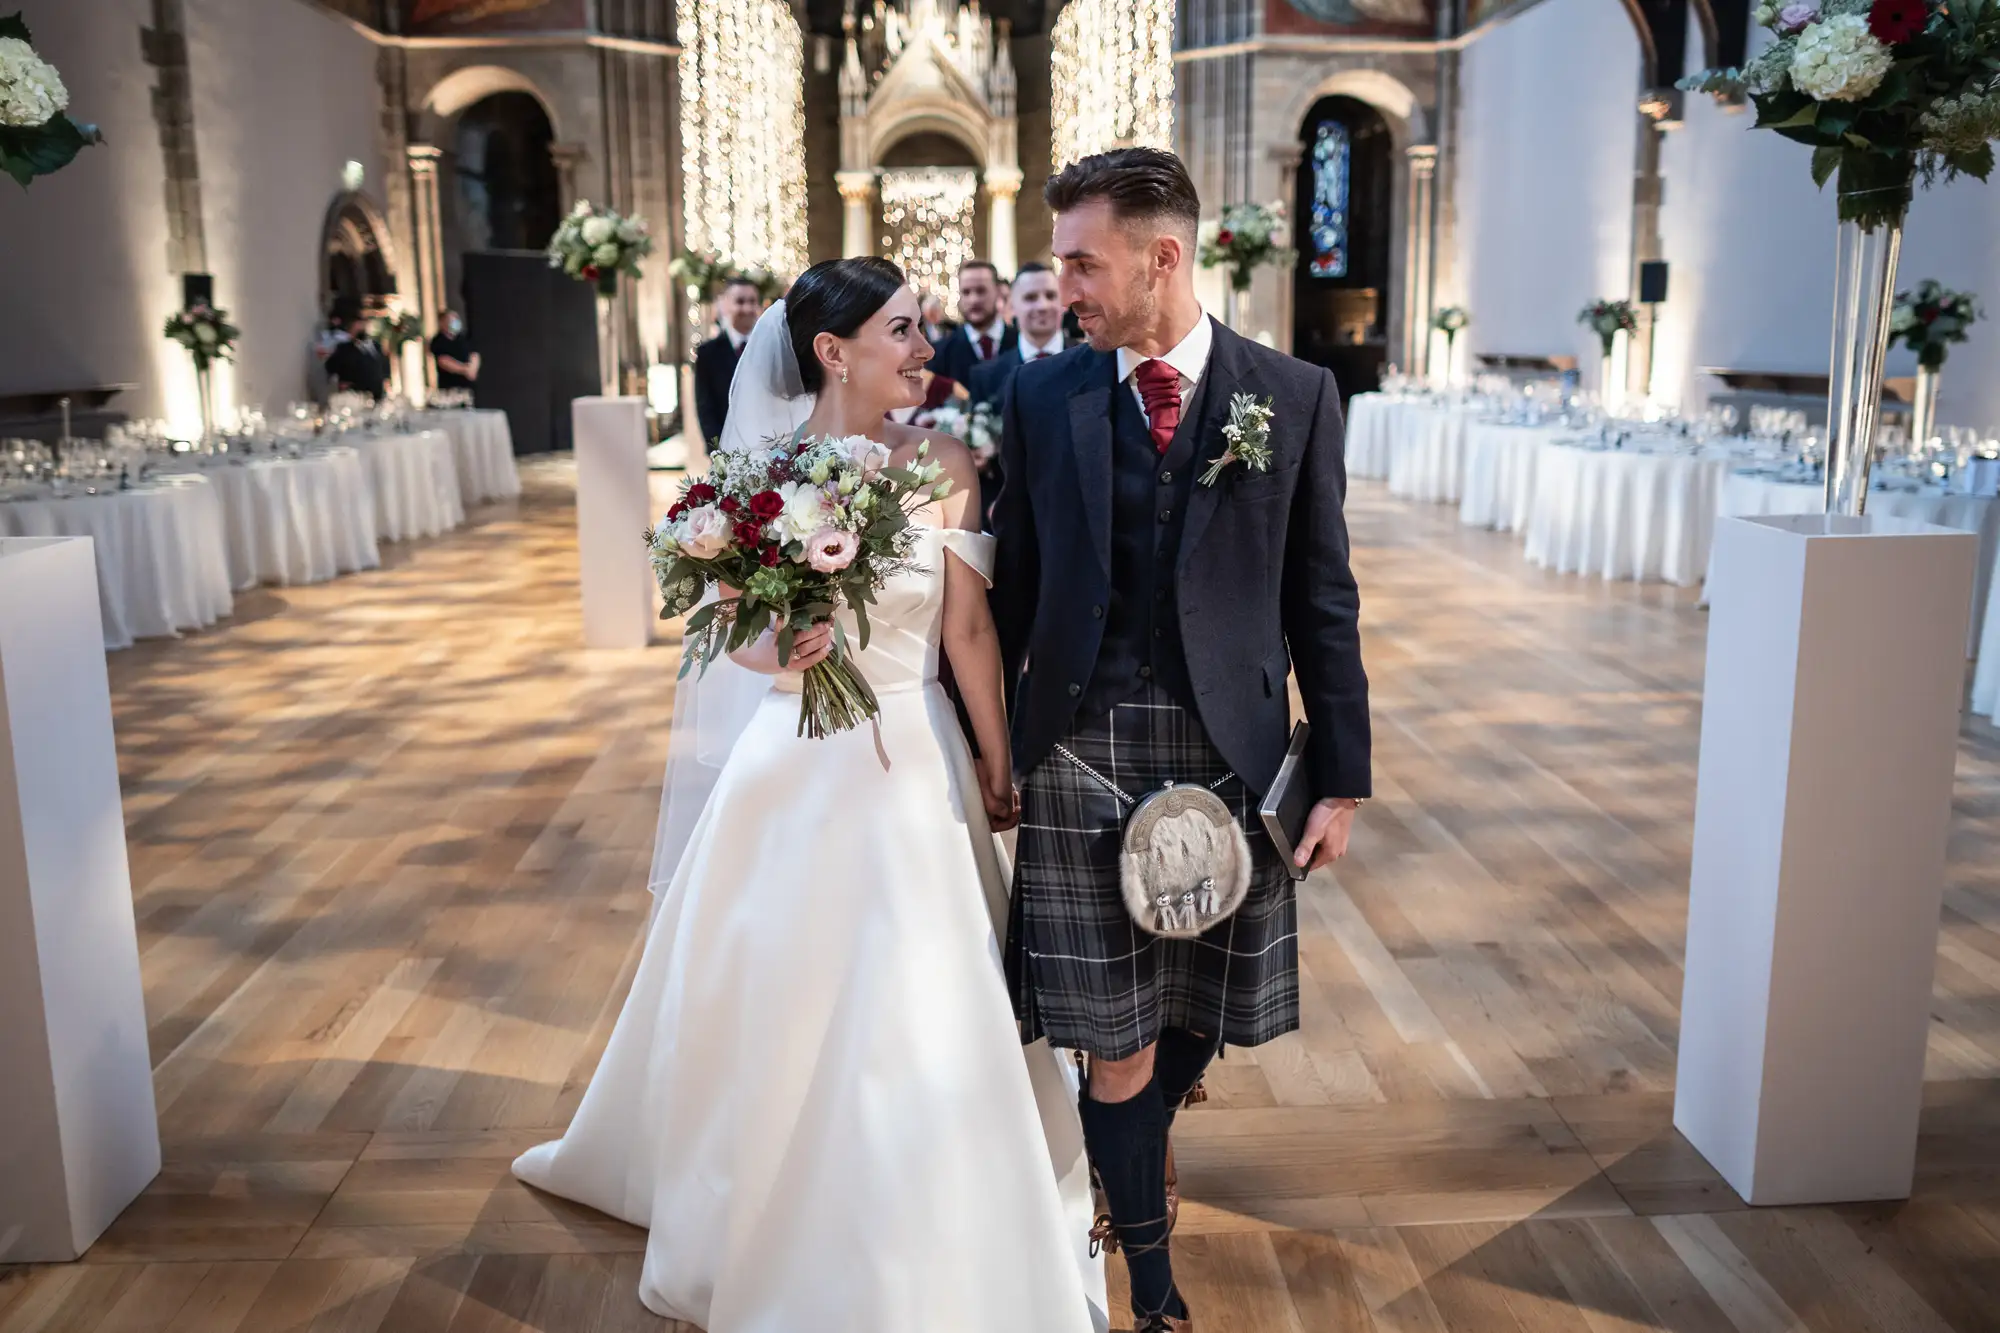 A bride in a white dress and a groom in a kilt walk hand in hand through a wedding venue, decorated with white columns and banquet tables.